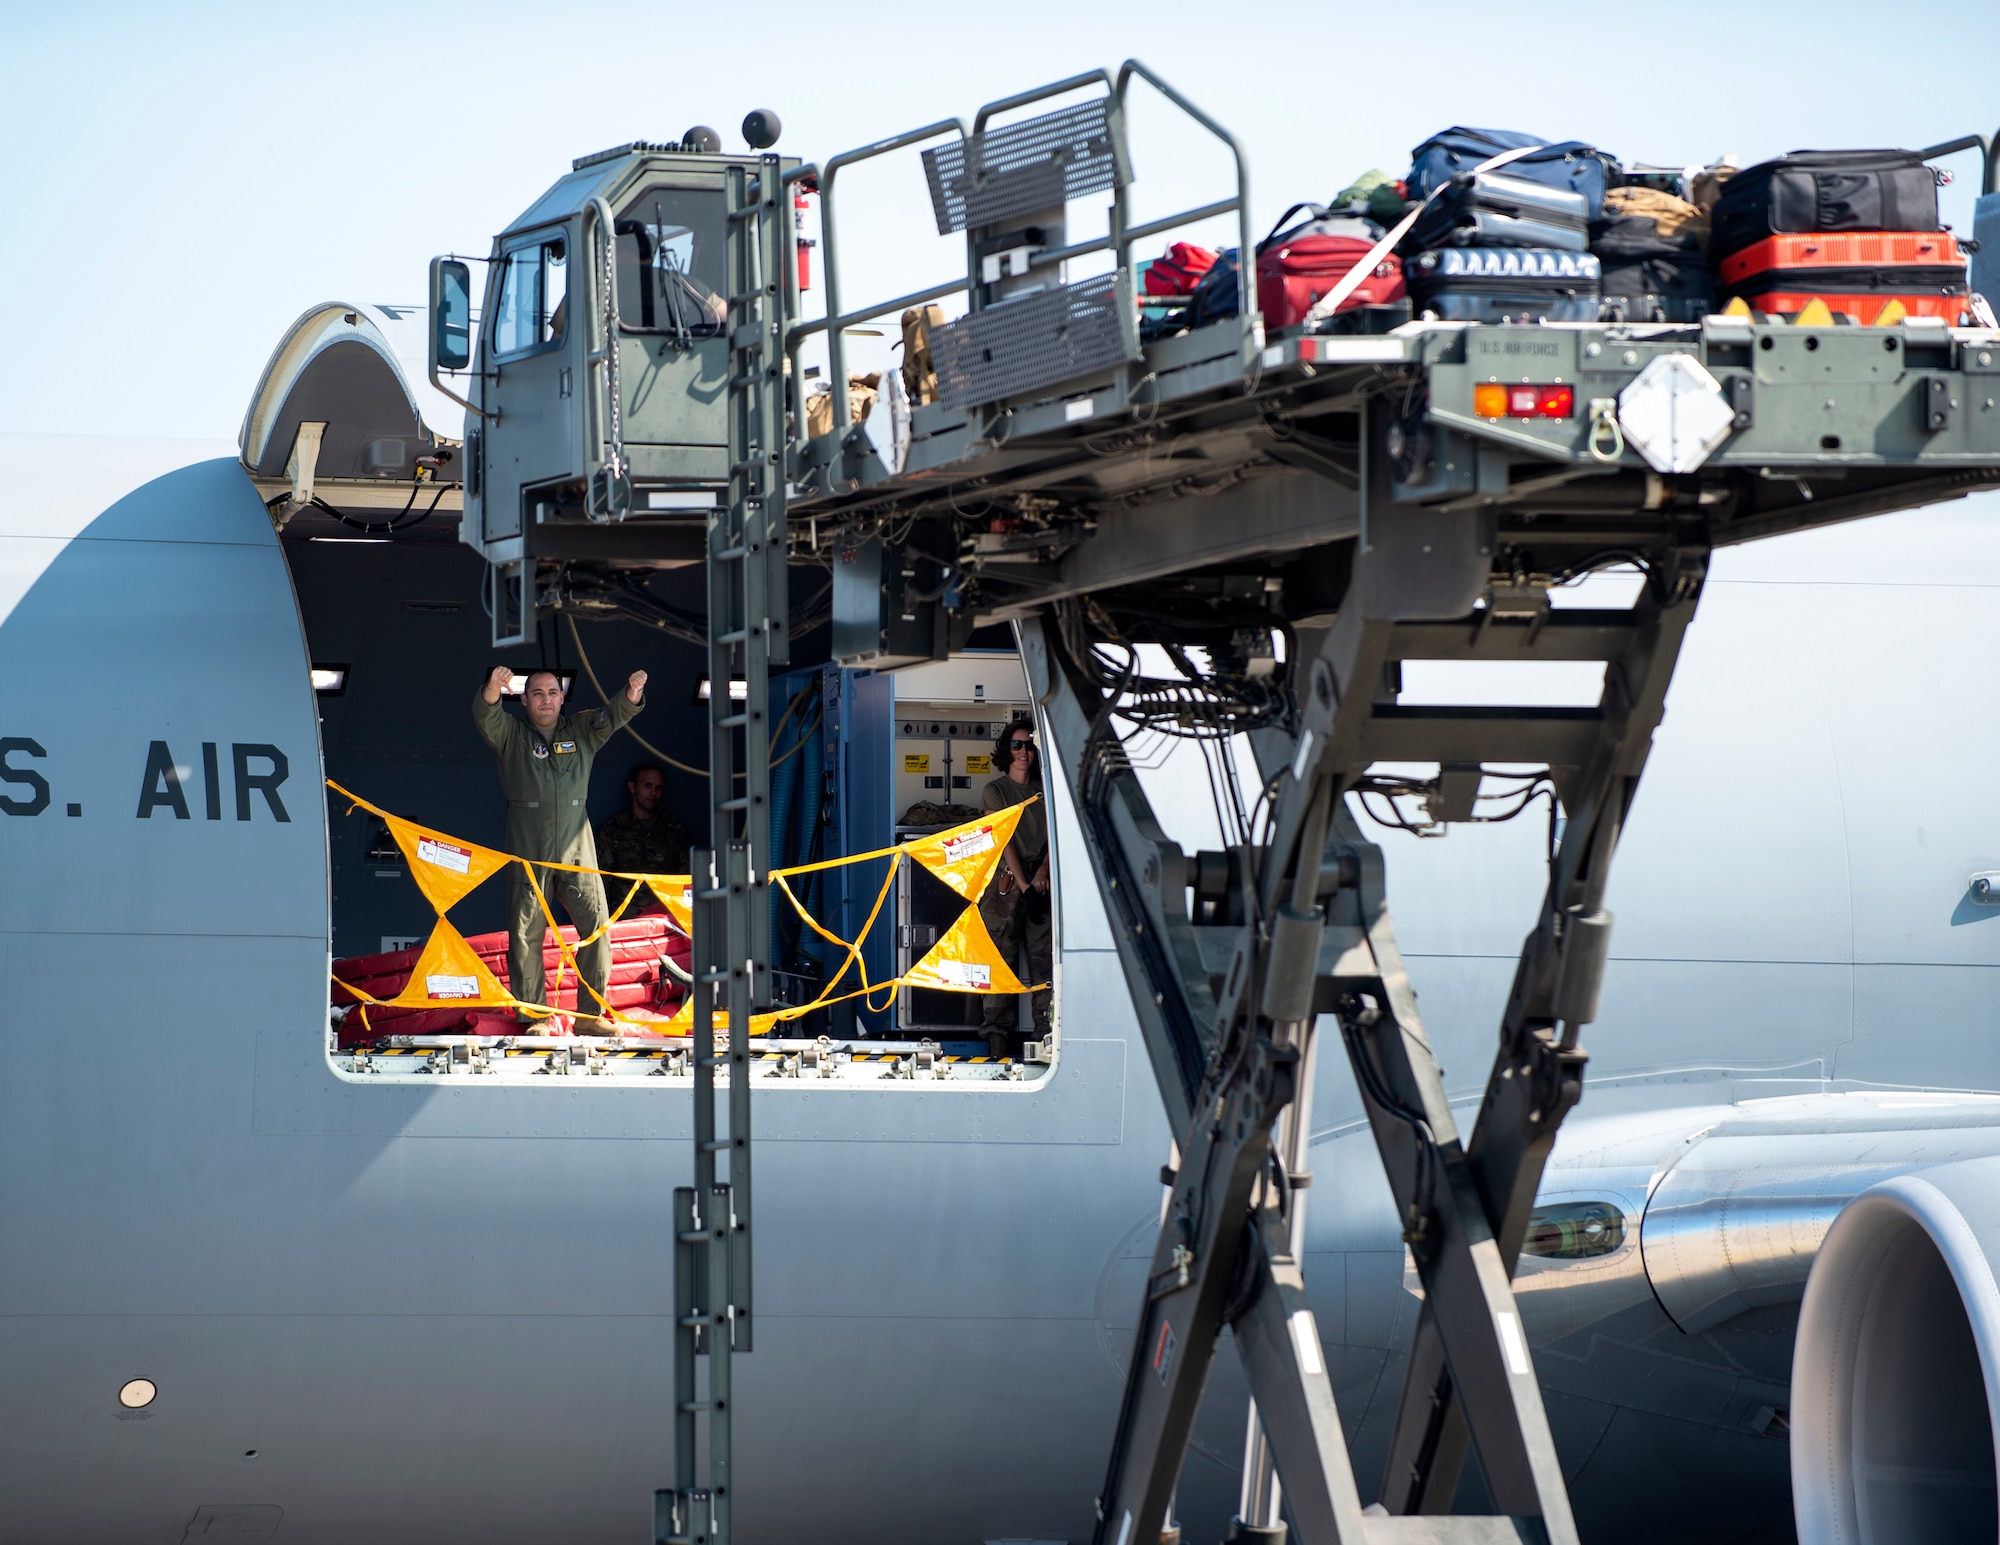 A U.S. Air Force Airman from the 133rd Air Refueling Squadron, directs U.S. Air Force Tech. Sgt. Brian Forman, K-loader operator, 133rd Air Transportation Function, into passion in St. Paul., Minn., Sept. 12, 2022.